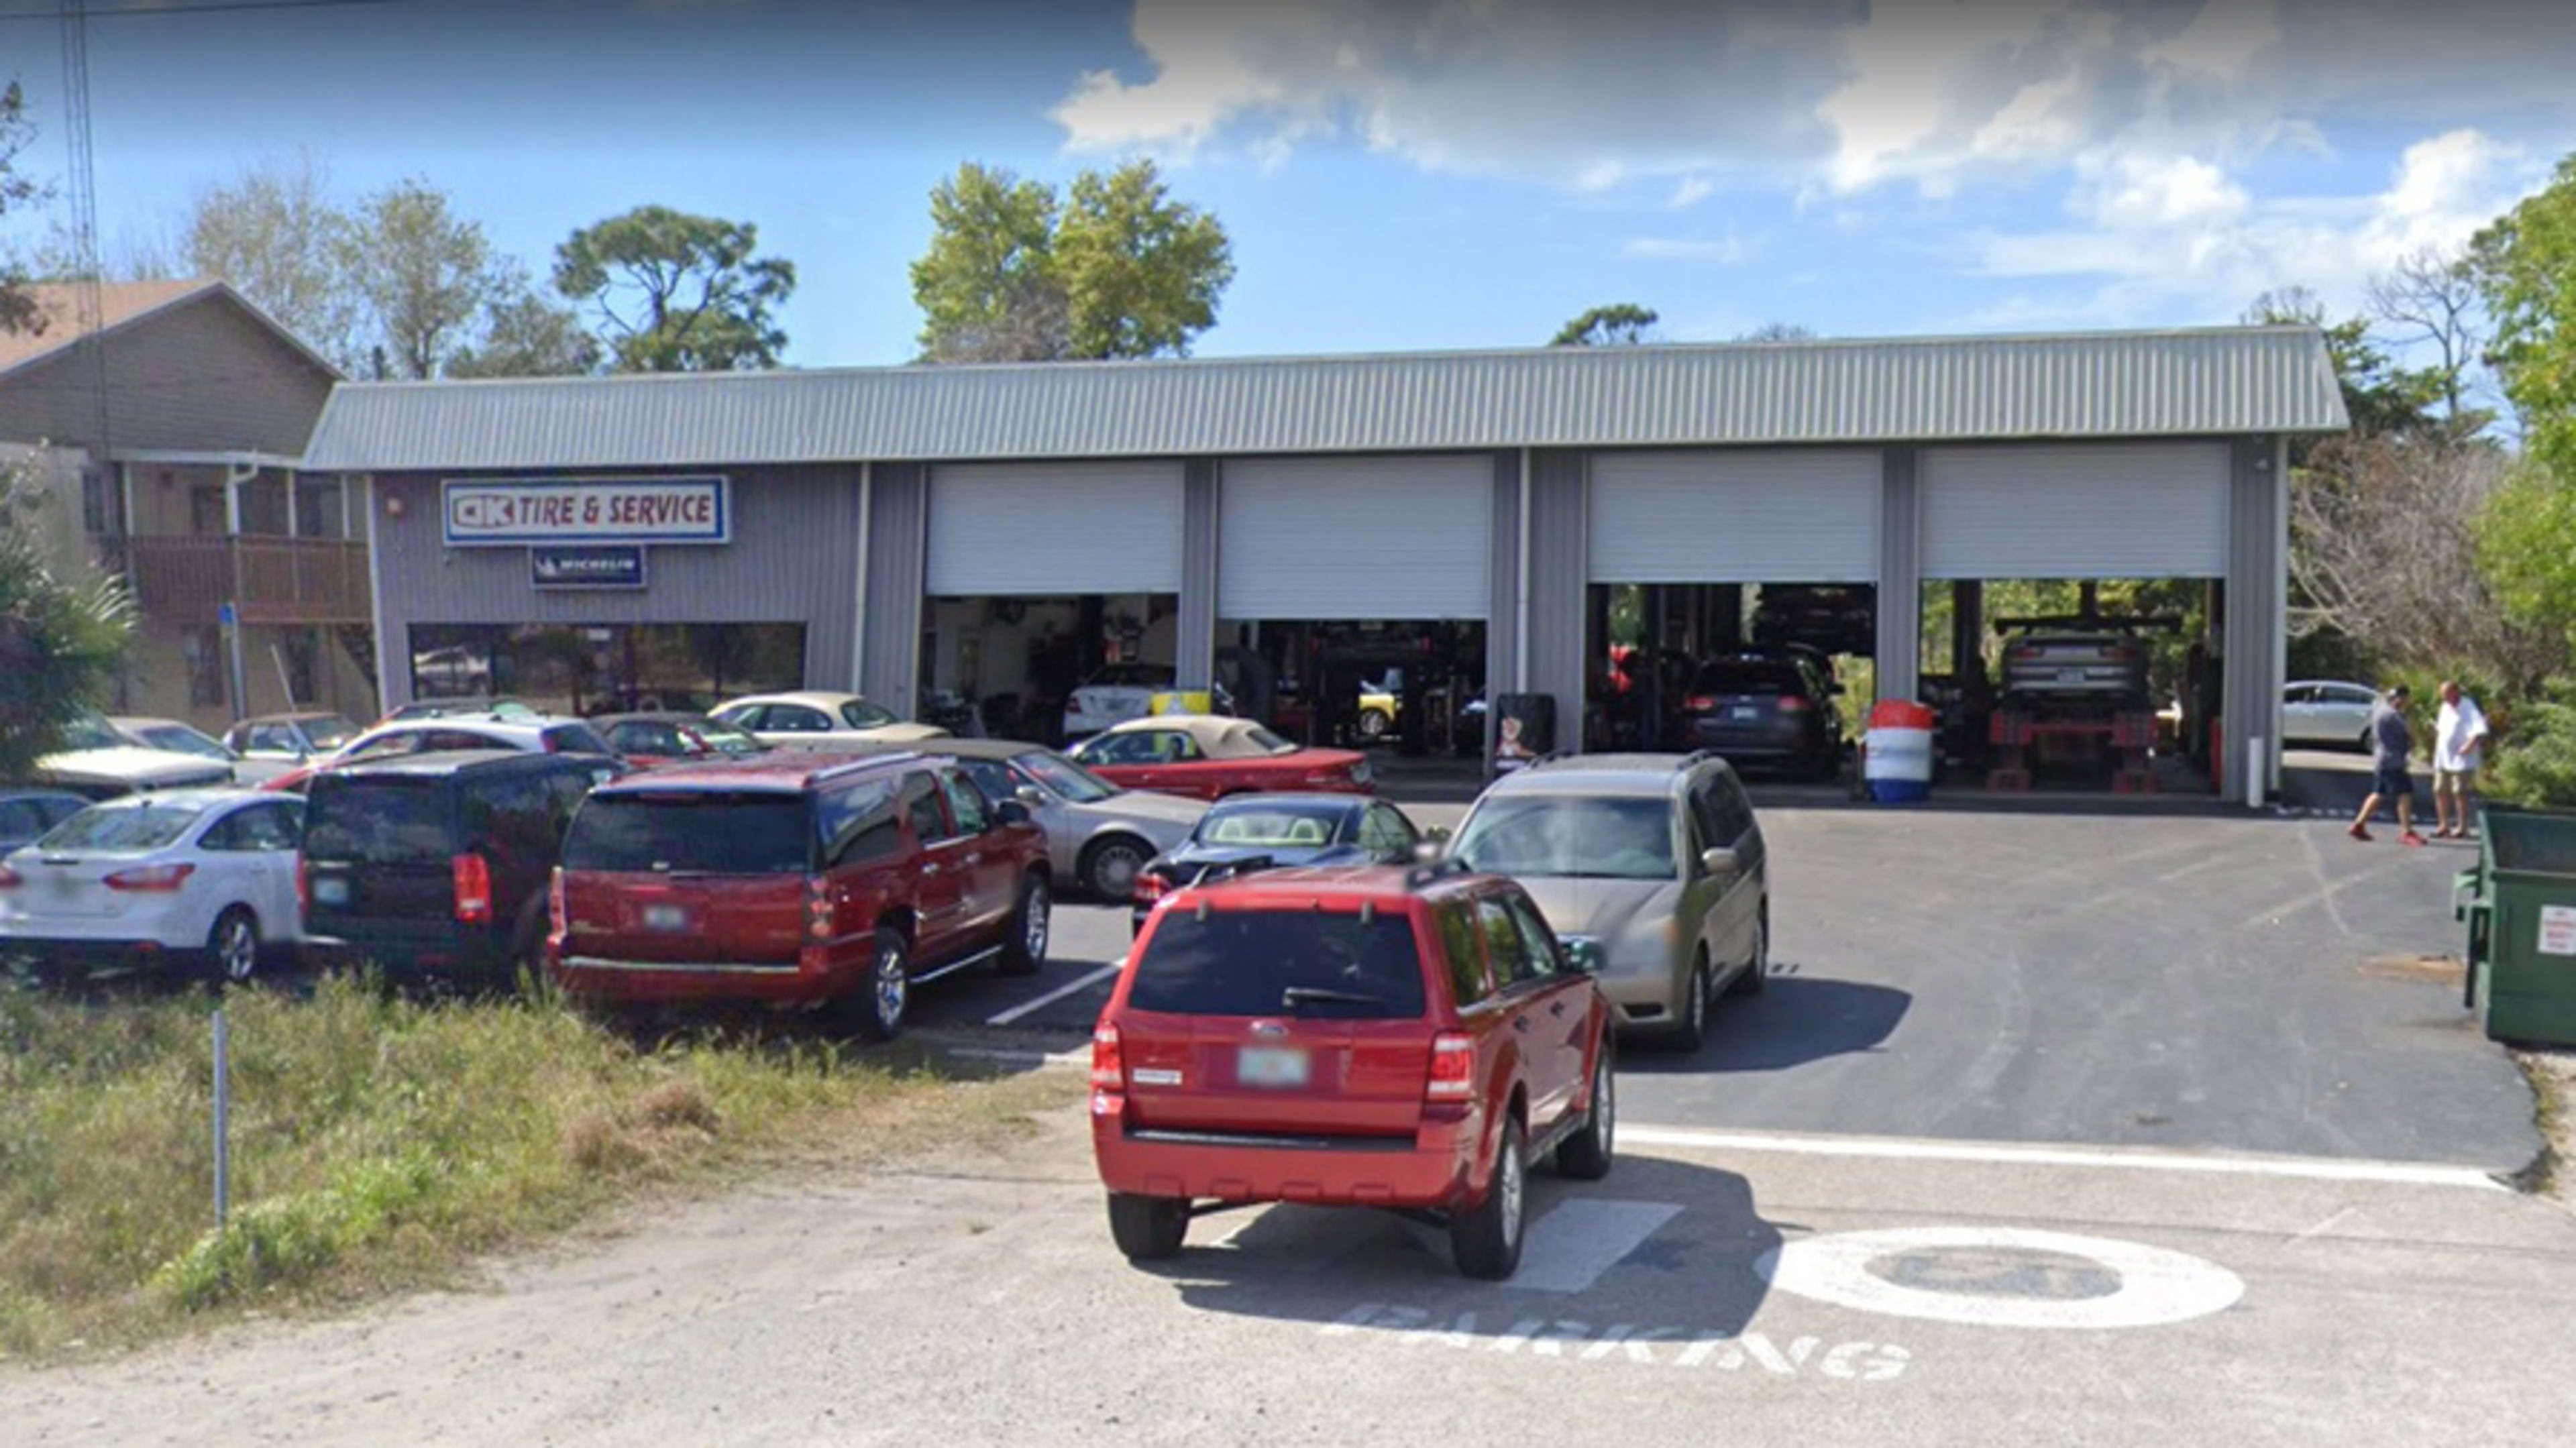 REGAL TIRE & AUTO - 5385 Yahl St, Naples, Florida - Tires - Phone Number -  Yelp